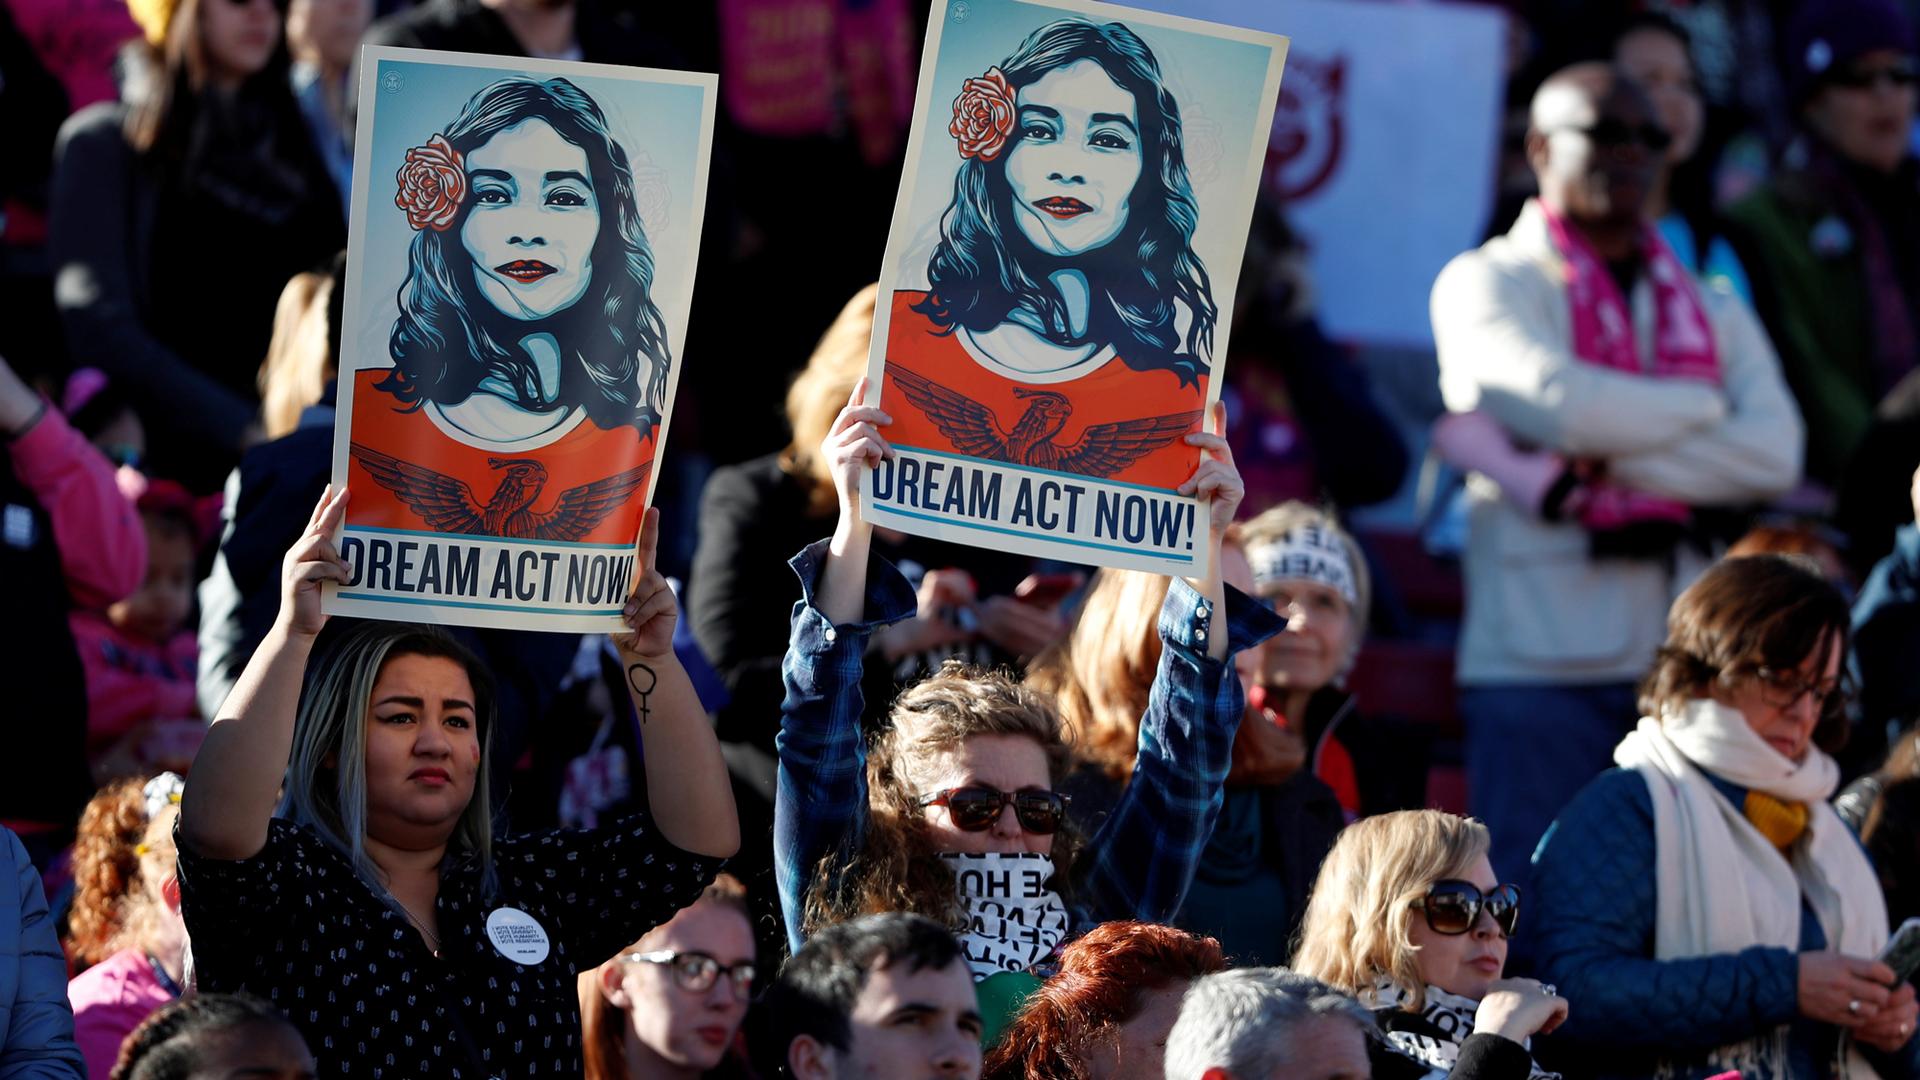 Supporters of Deferred Action for Childhood Arrivals (DACA) hold signs during the Women's March rally in Las Vegas, Jan. 21, 2018.